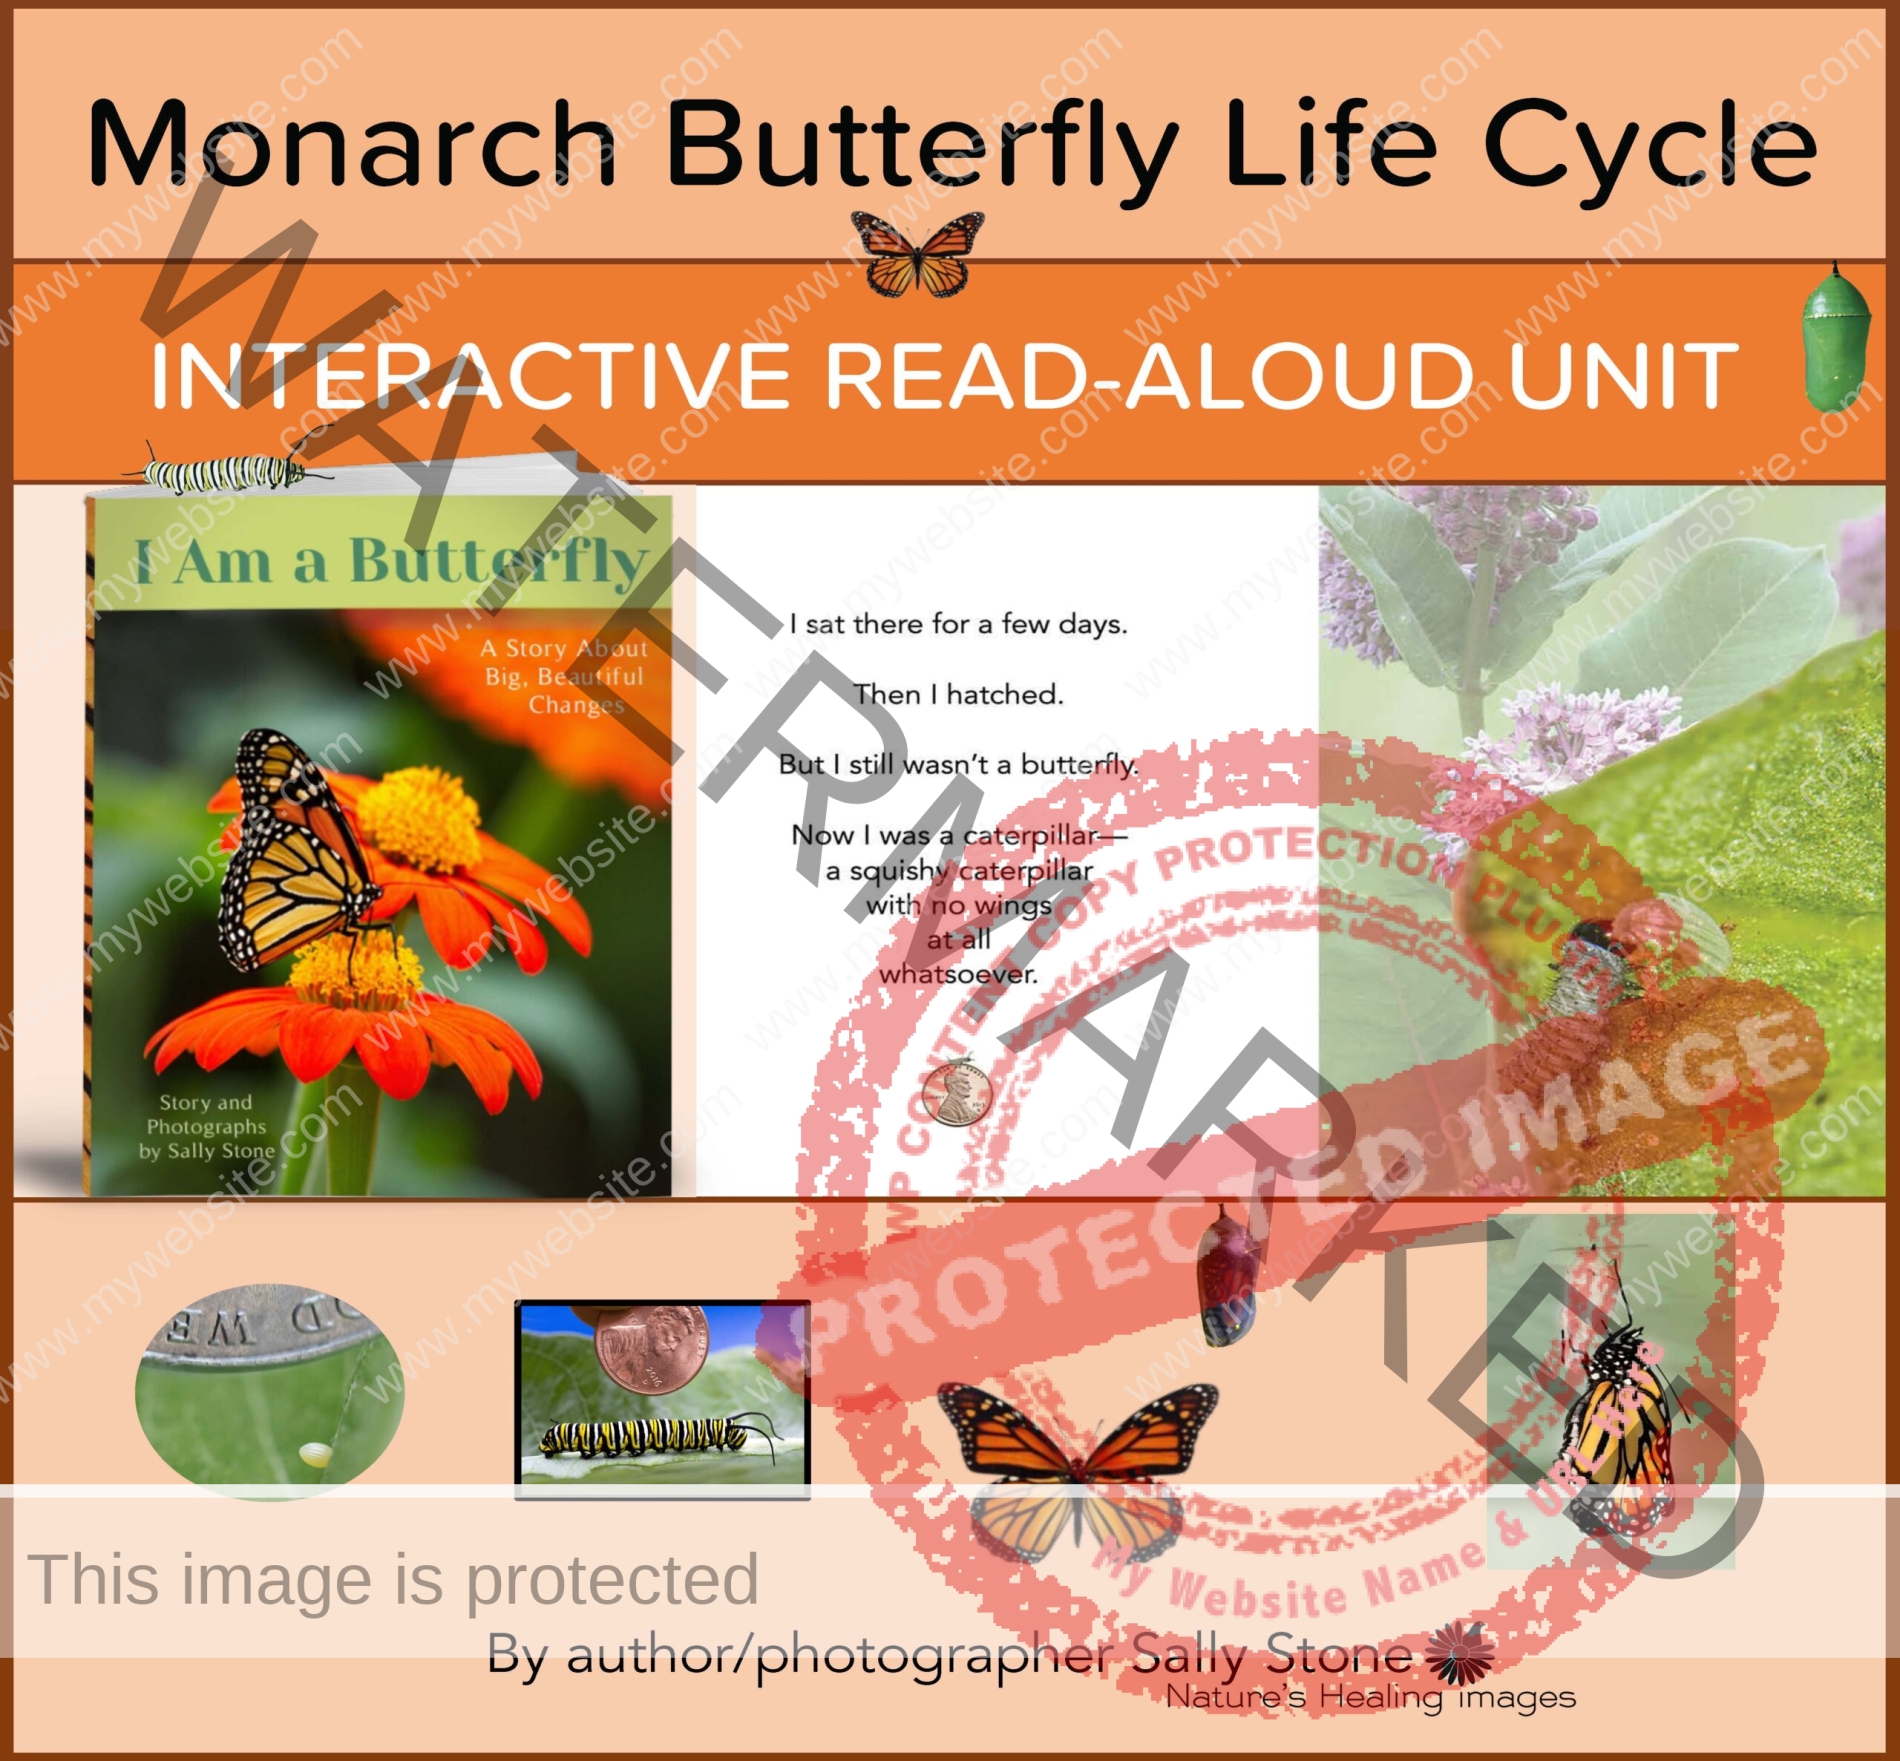 I Am a Butterfly Interactive Read-Aloud Unit COVER